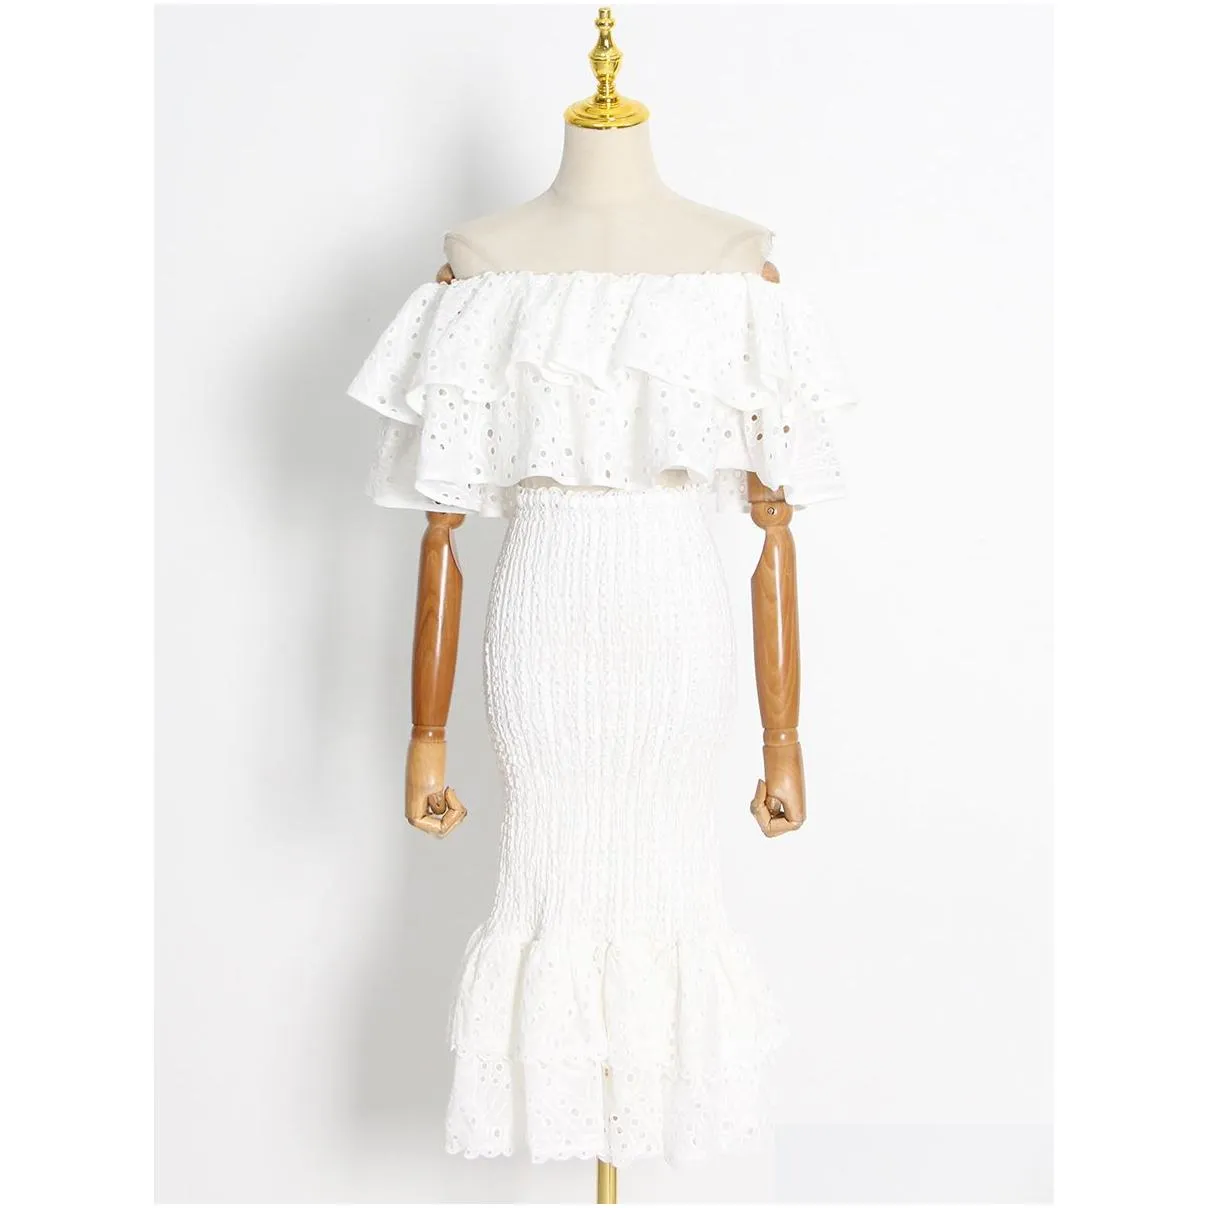 australian two piece dress trendy ruffled heavy embroidered one shoulder short top with a slim high waisted fishtail skirt set